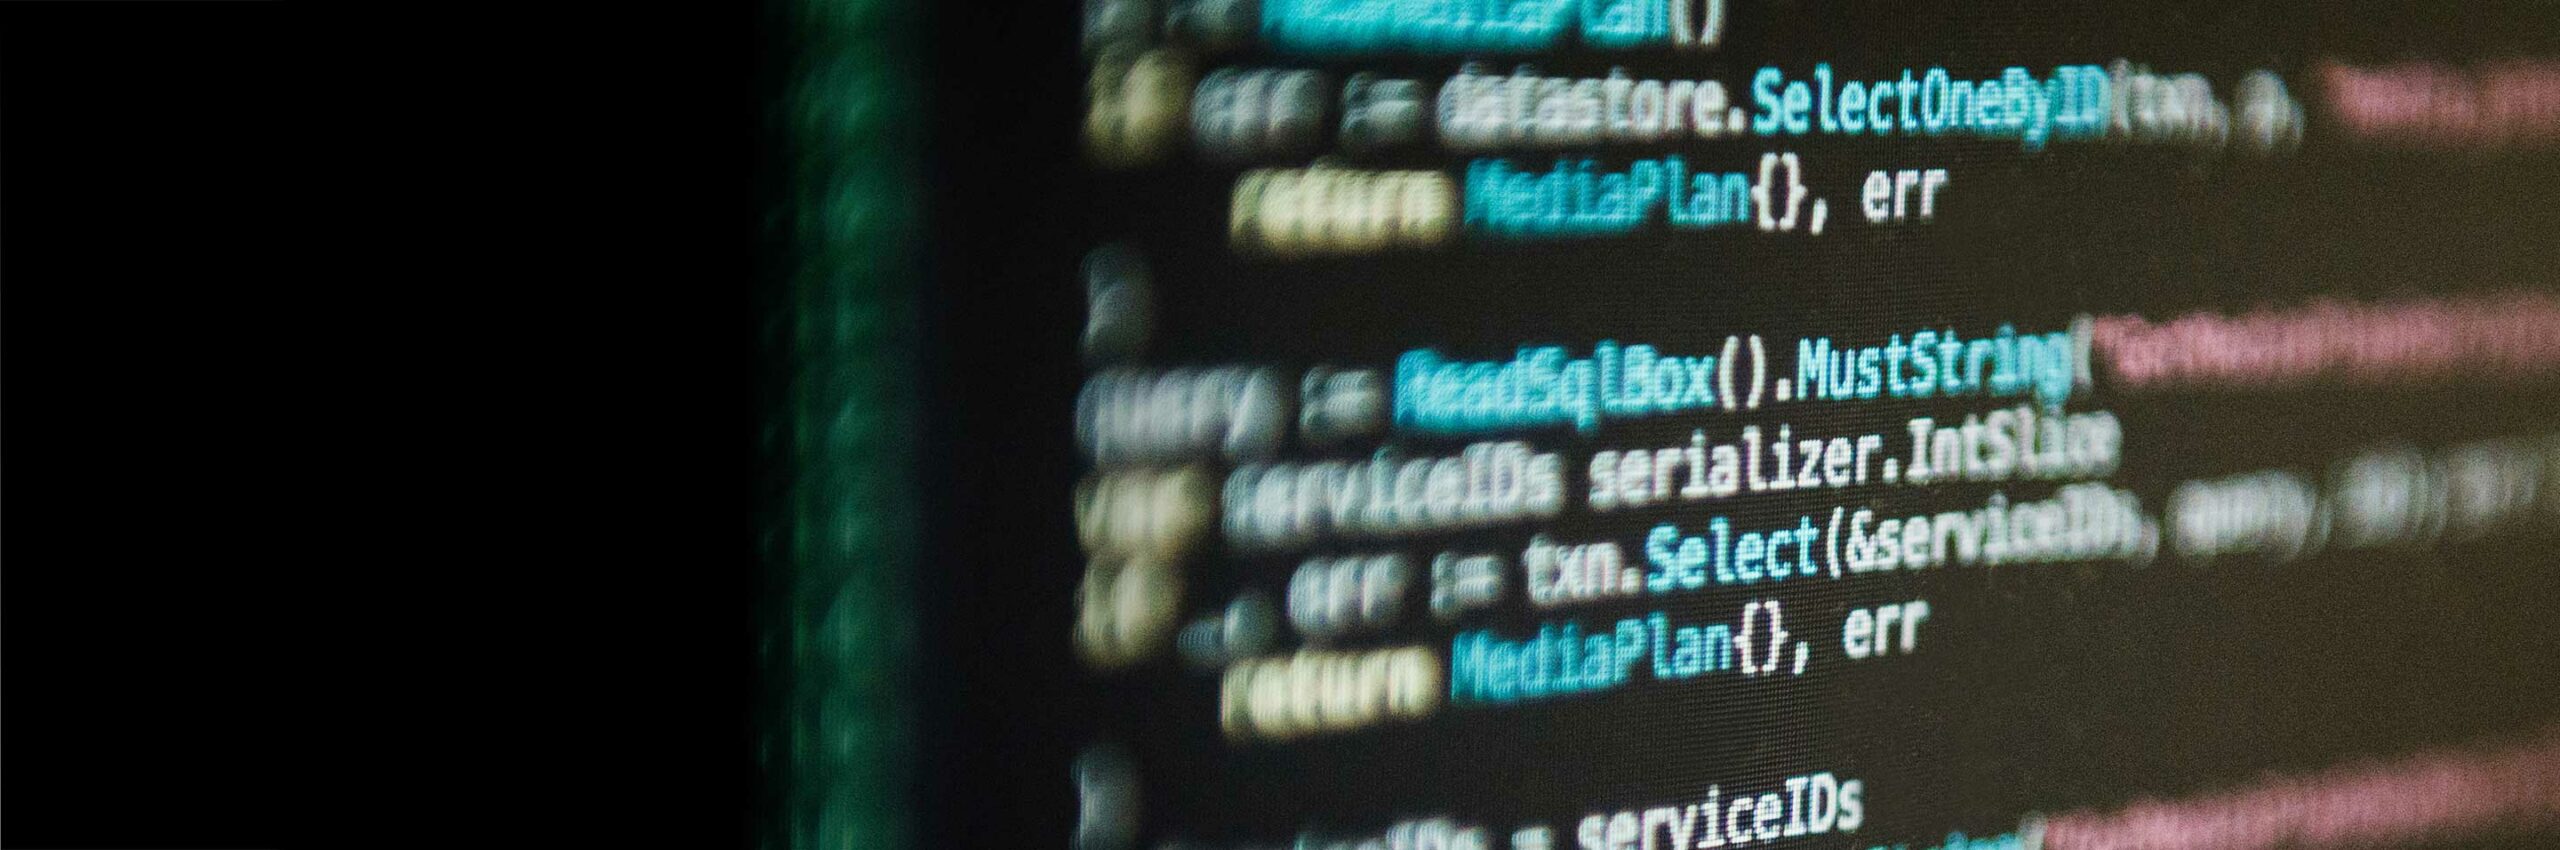 code on a computer screen